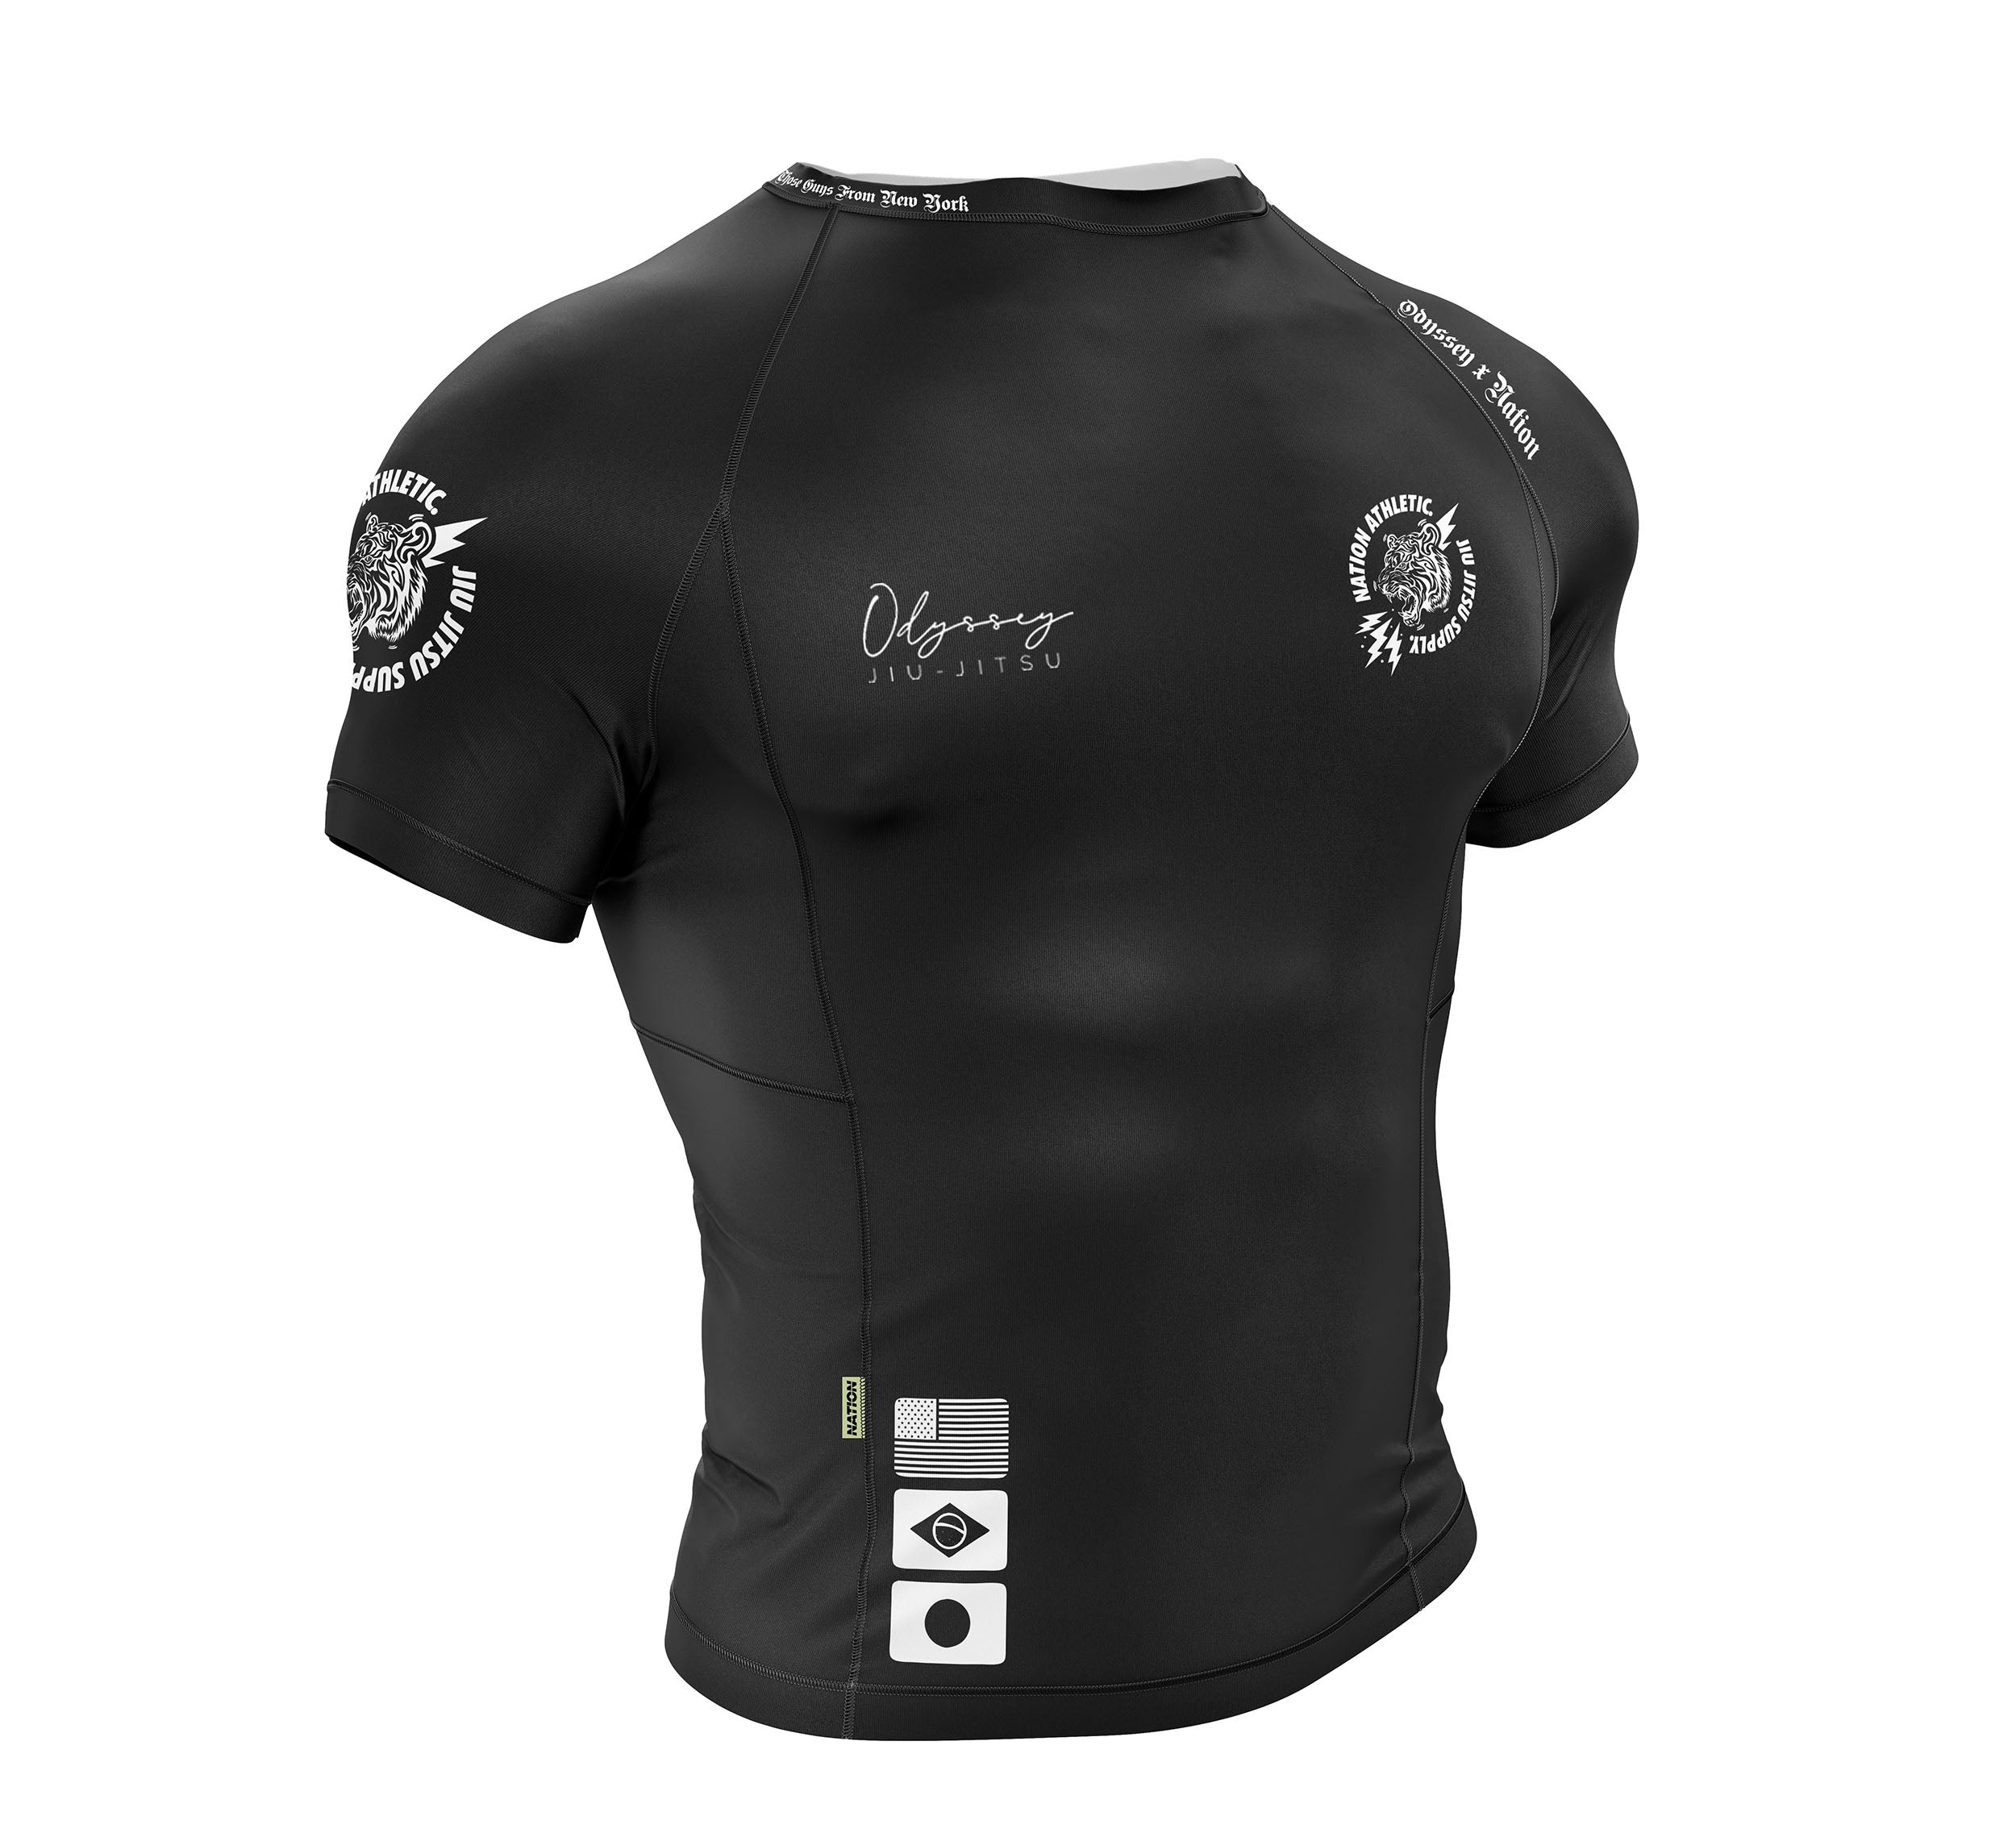 Shop Nation Athletic BJJ Rash guards! Browse our selection of Jiu Jitsu Rash Guards, BJJ Gis &amp; Nogi Grappling Shorts from one of the top BJJ Gear brands!